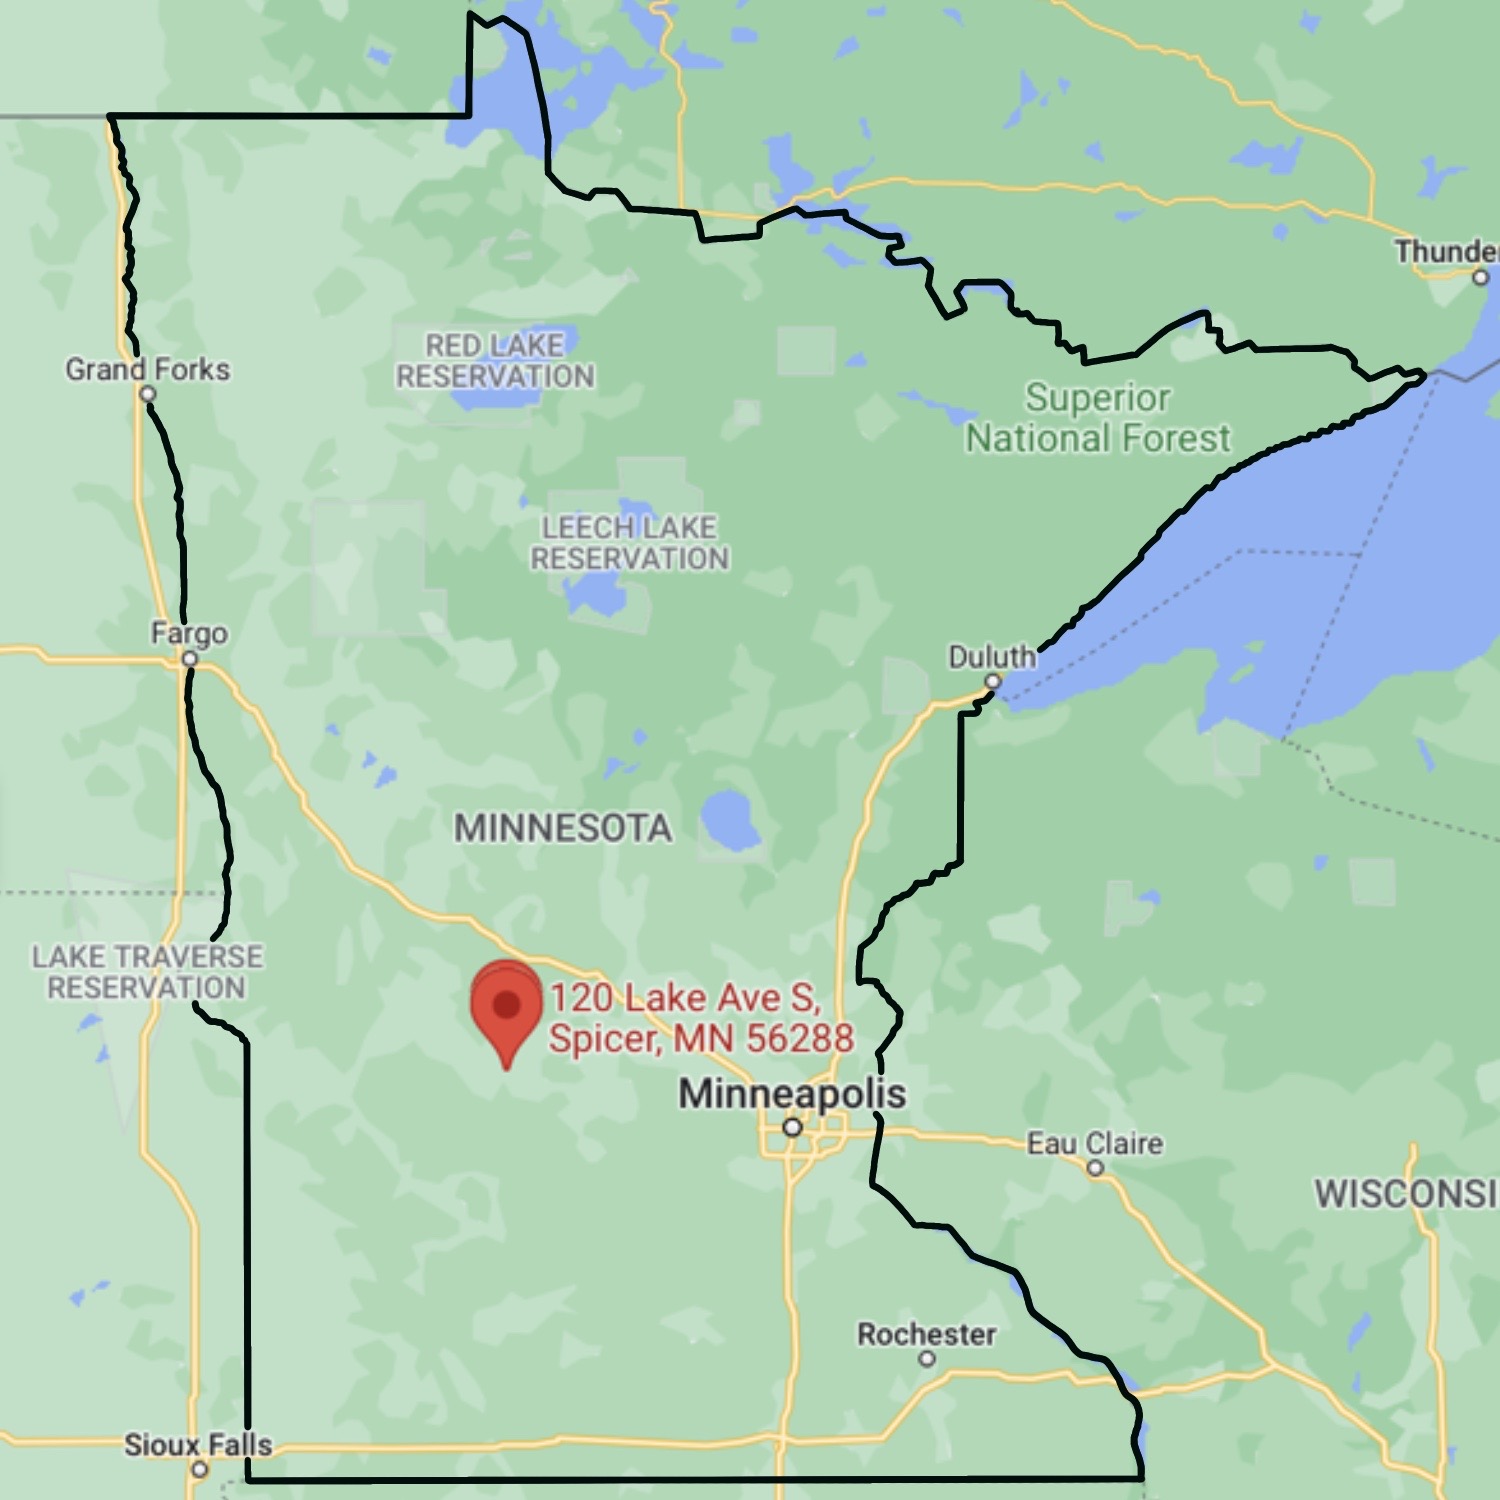 Photo of the map of Minnesota with a pin where Mel's Sport Shop is located. 120 Lake Ave S. Spicer, MN 56288